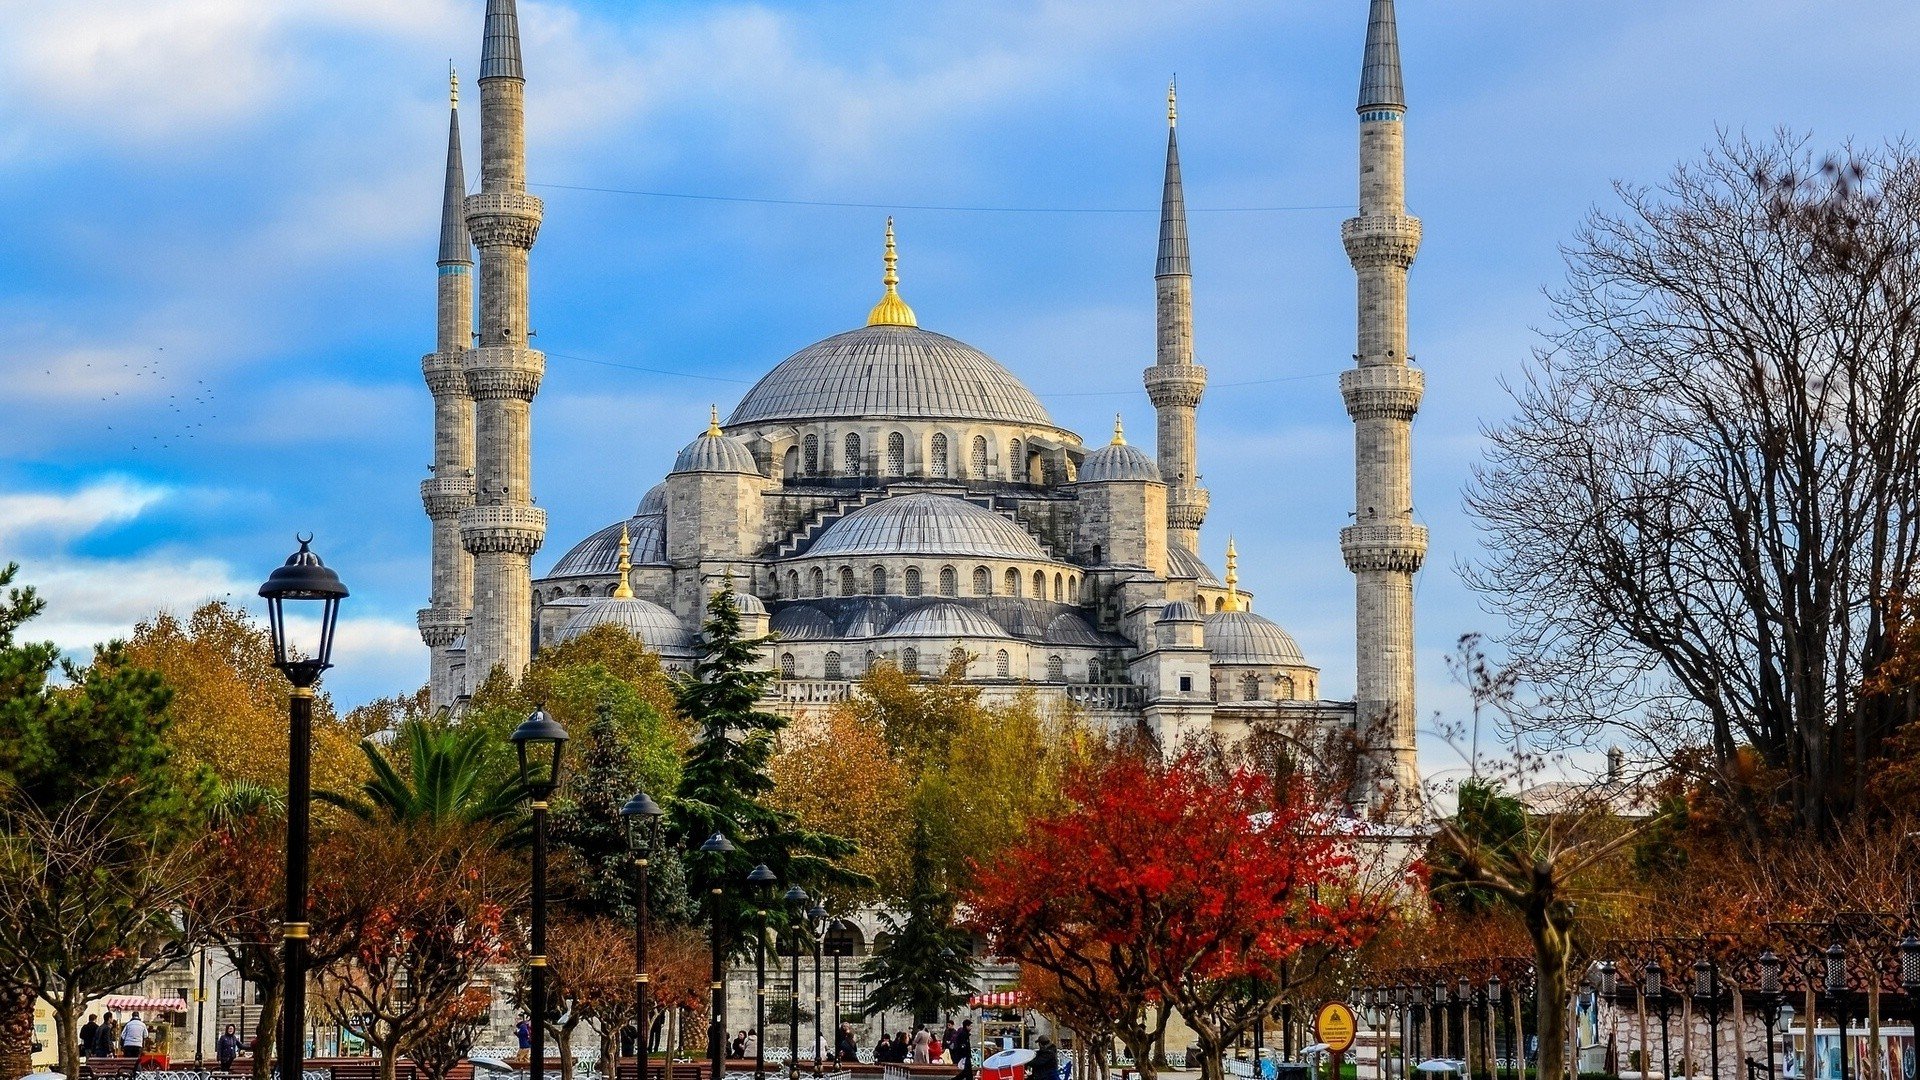 Blue Mosque, Sultan Ahmed Mosque, Mosque, Architecture, Islam, City, Islamic architecture, Istanbul, Turkey, Trees Wallpaper